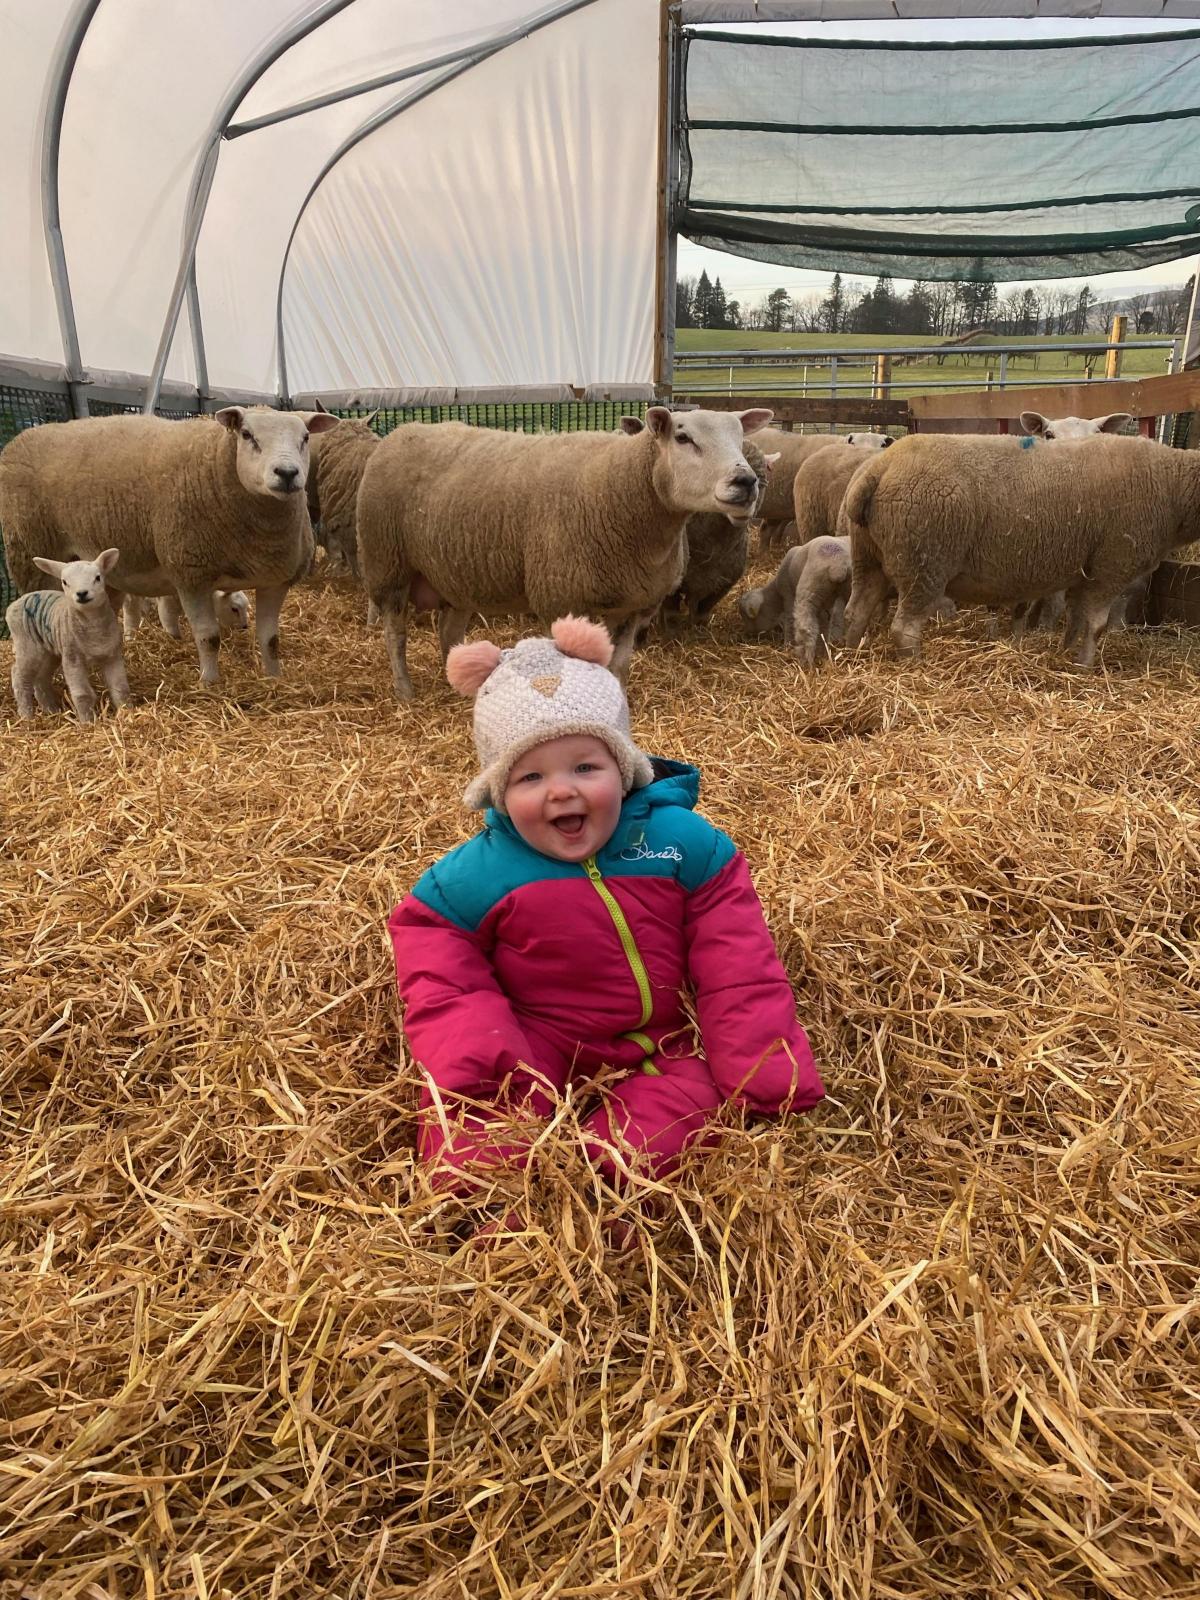 Fiona Harley - Our youngest daughter Nairn Harley, age 1, checking in on the Texel ewes and lambs in the polytunnel at home at Craiglaw Farm, Rumbling Bridge